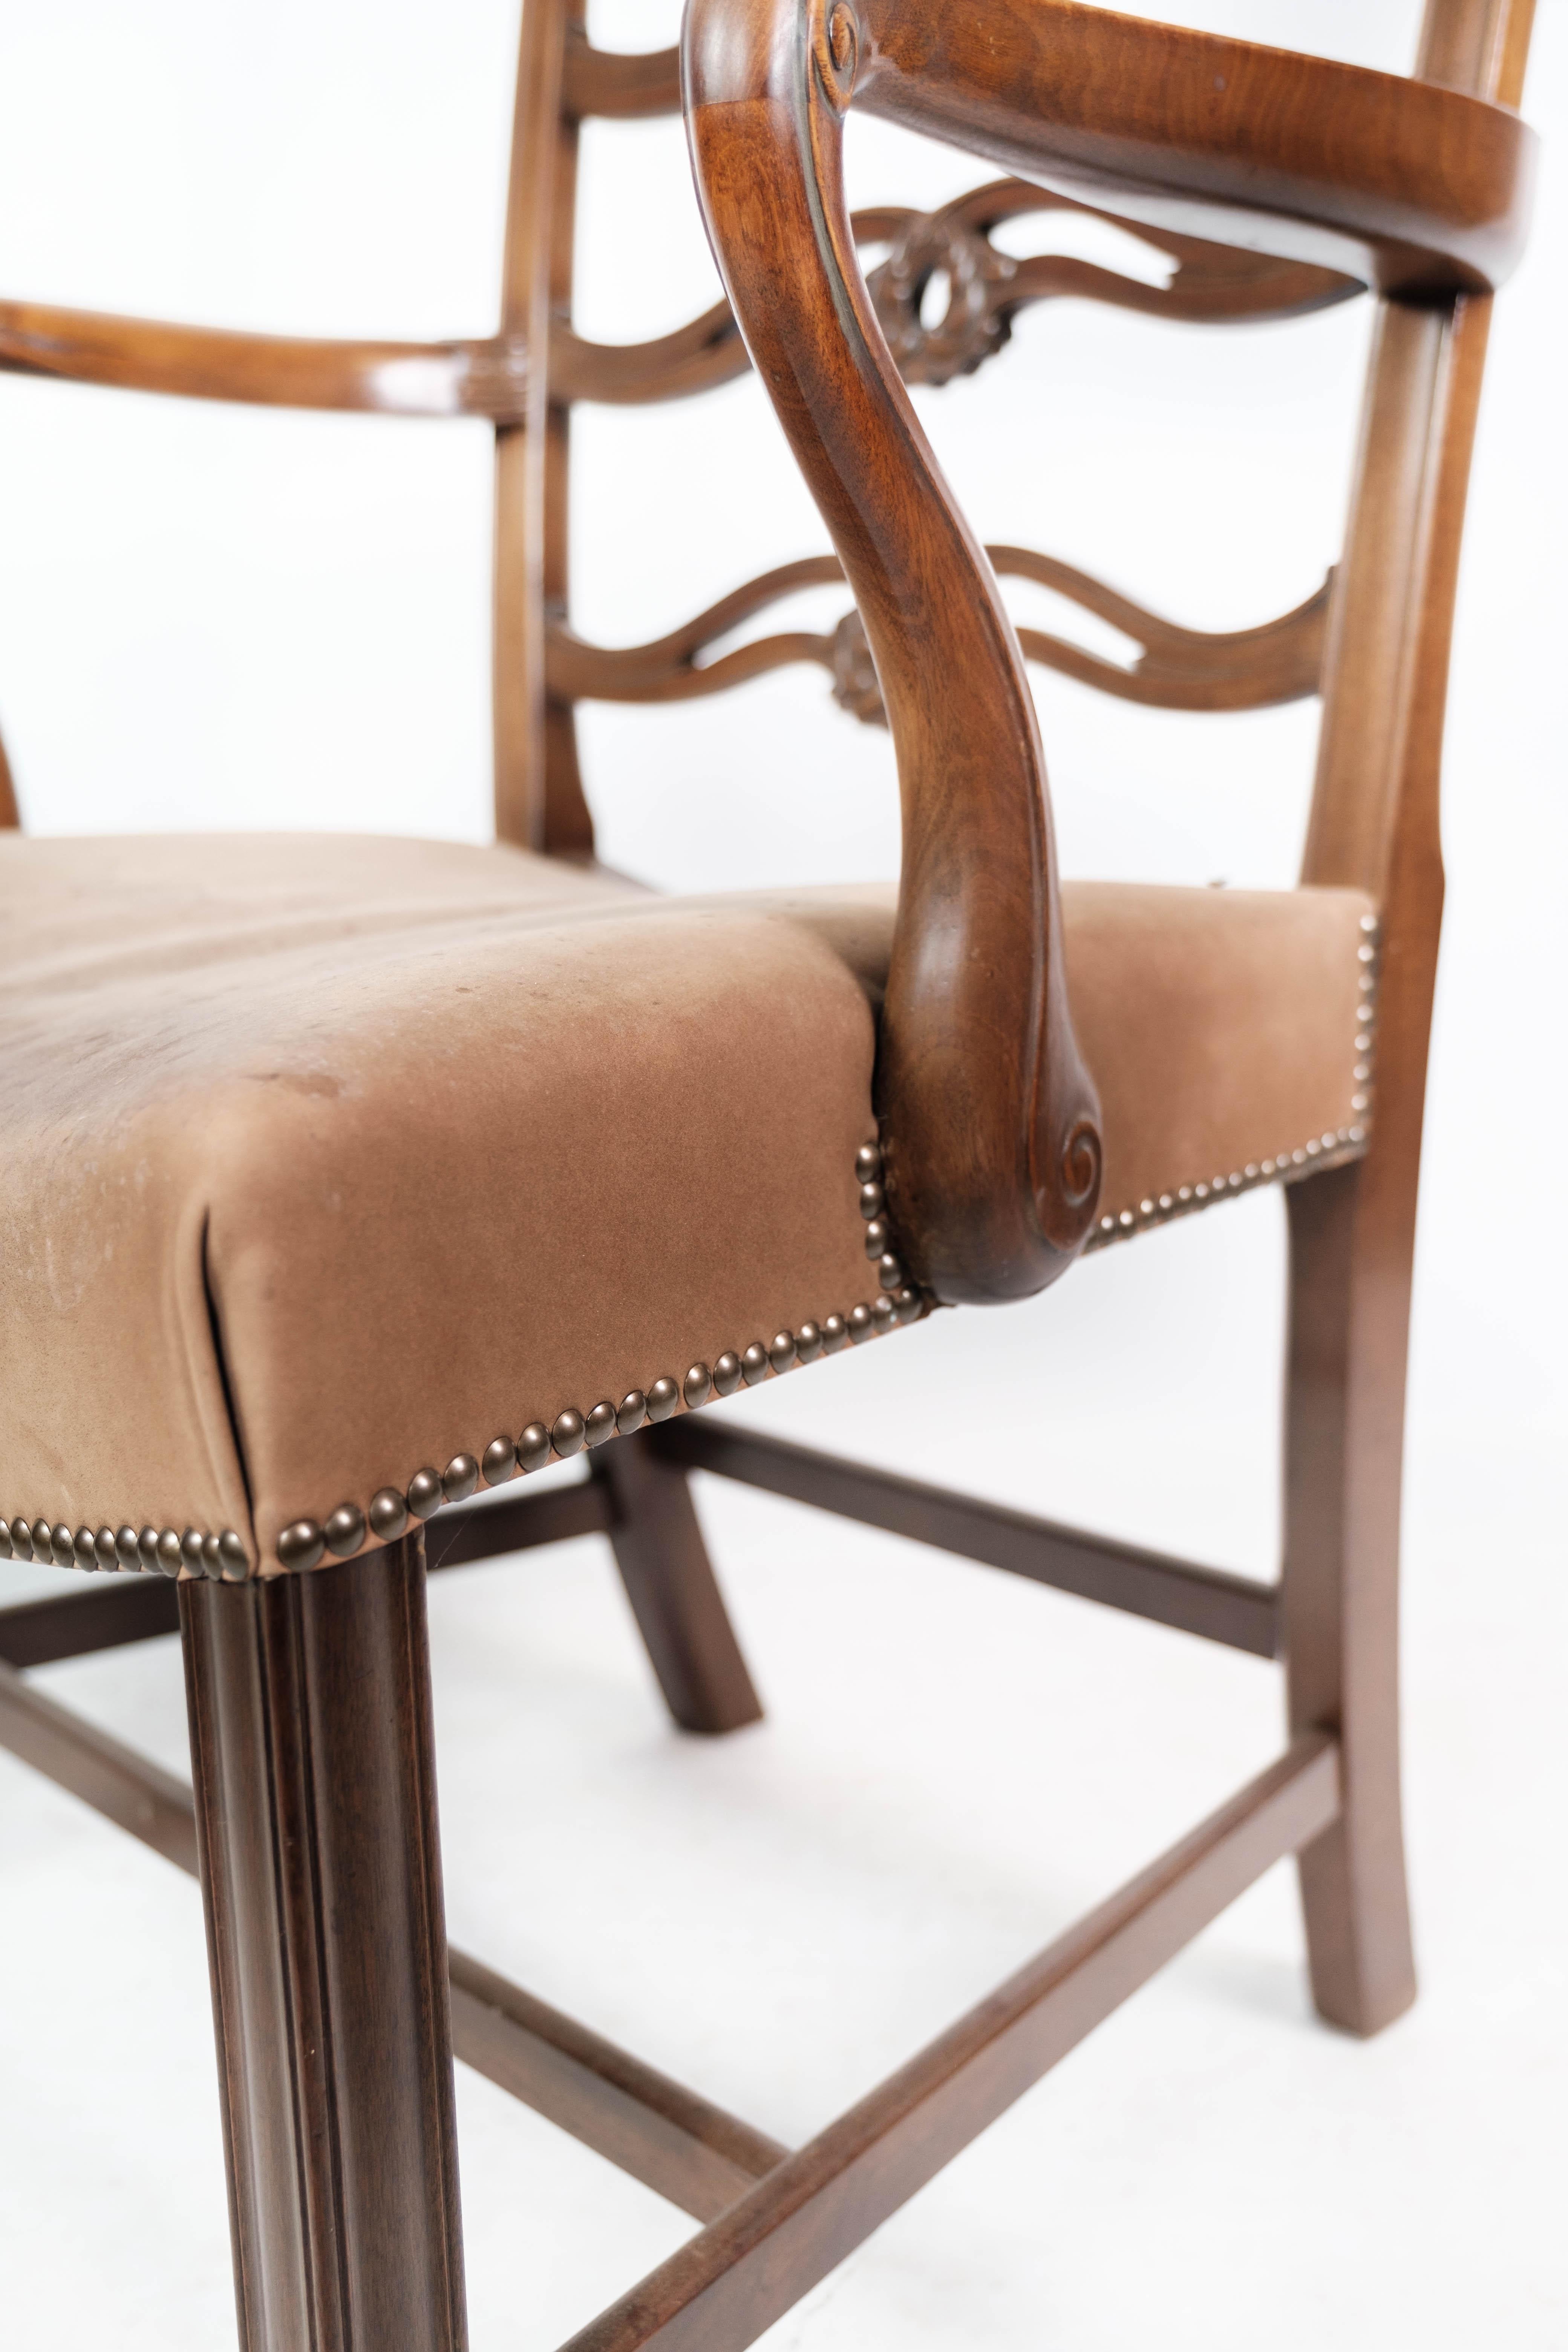 Danish Antique Armchair of Mahogany and with Original Upholstery of Light Fabric, 1880s